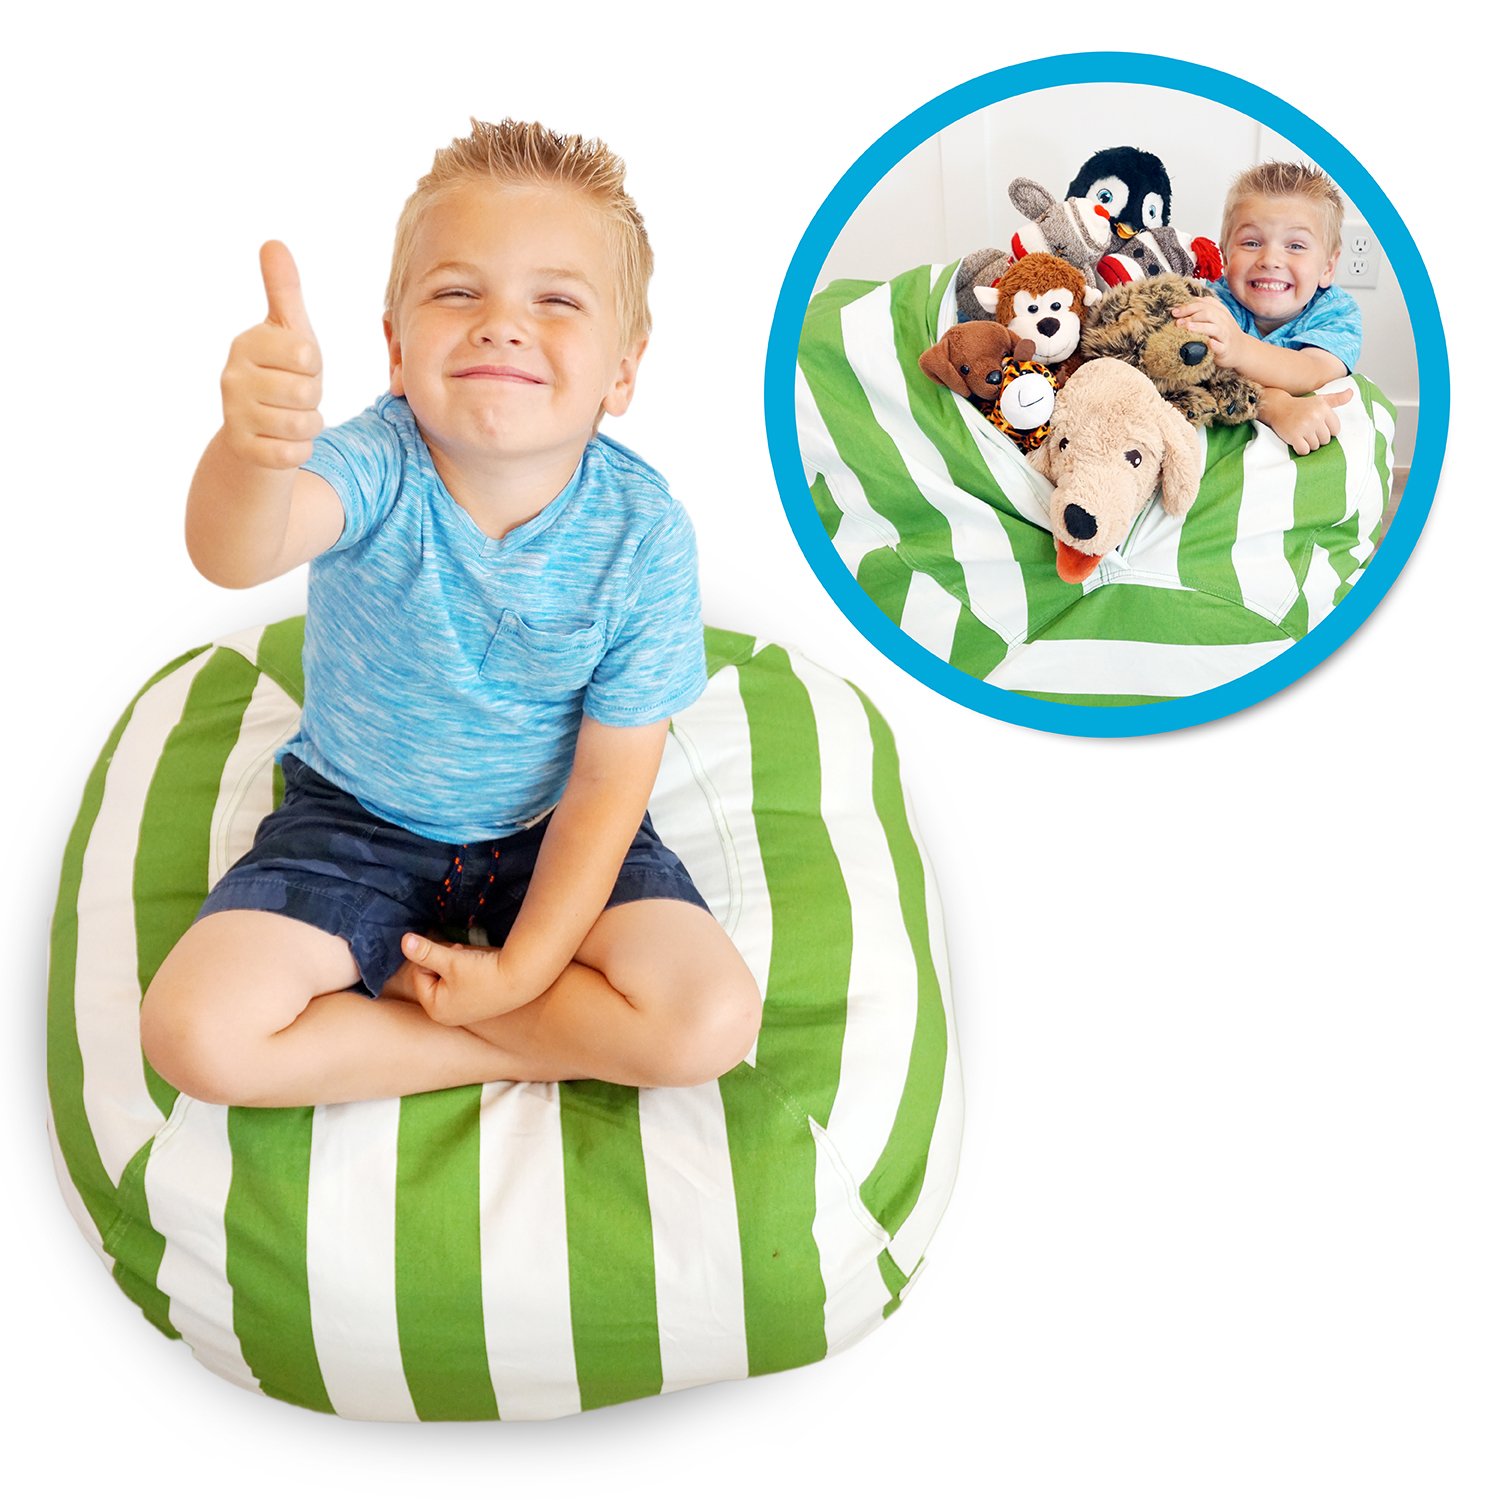 Soothing Company Stuffed Animal Bean Bag Chair for Kids - Extra Large Empty Beanbag